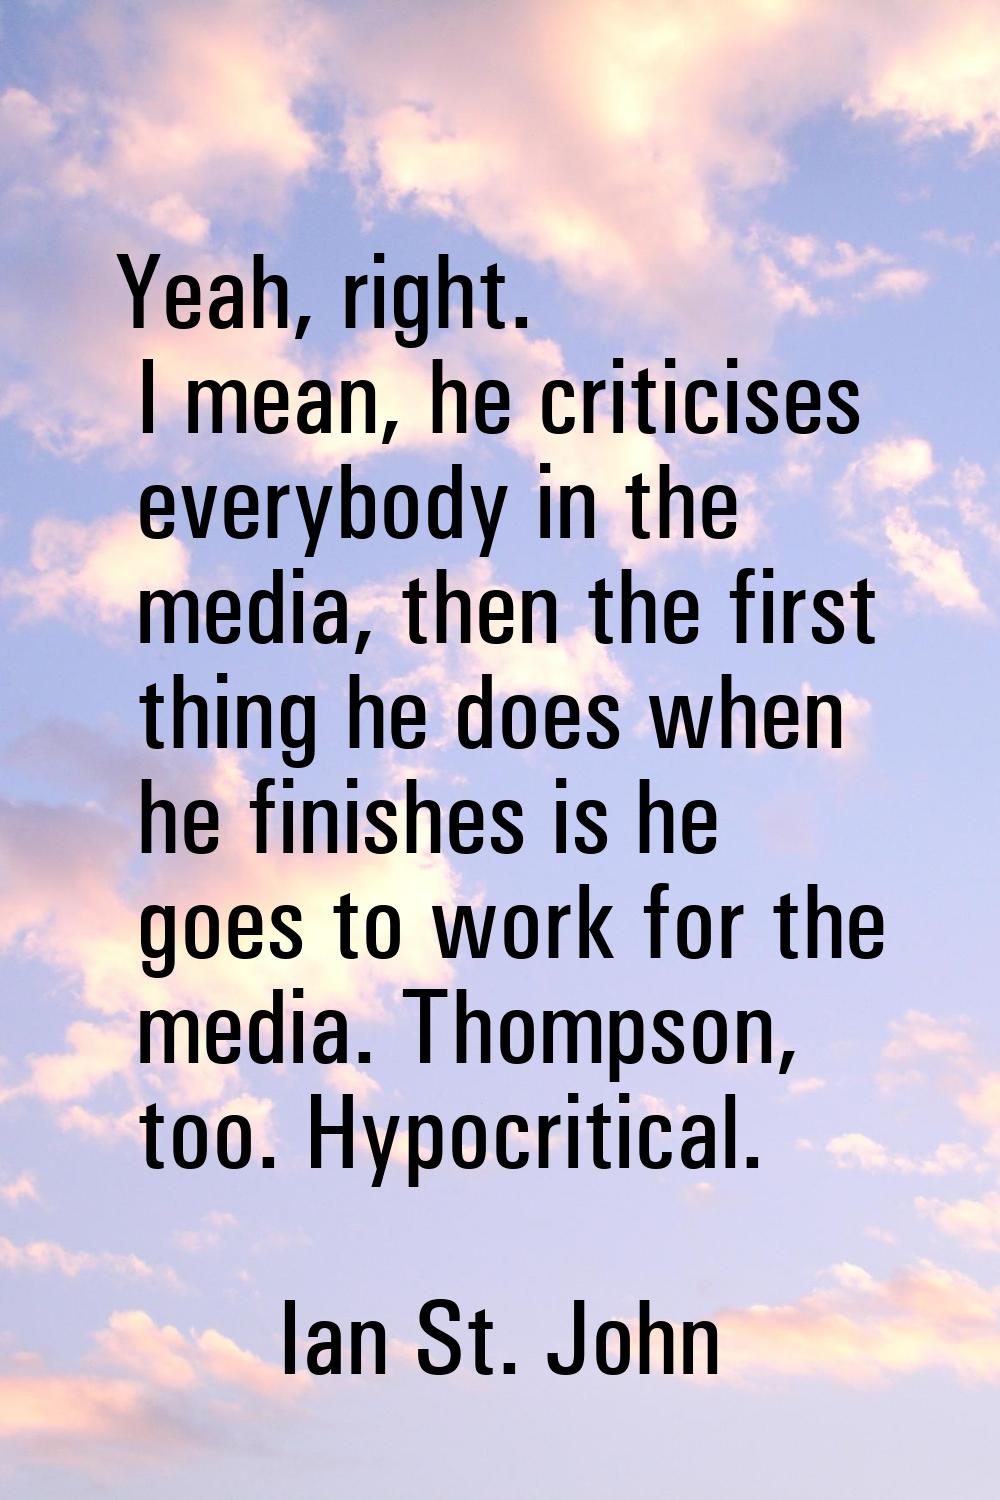 Yeah, right. I mean, he criticises everybody in the media, then the first thing he does when he fin